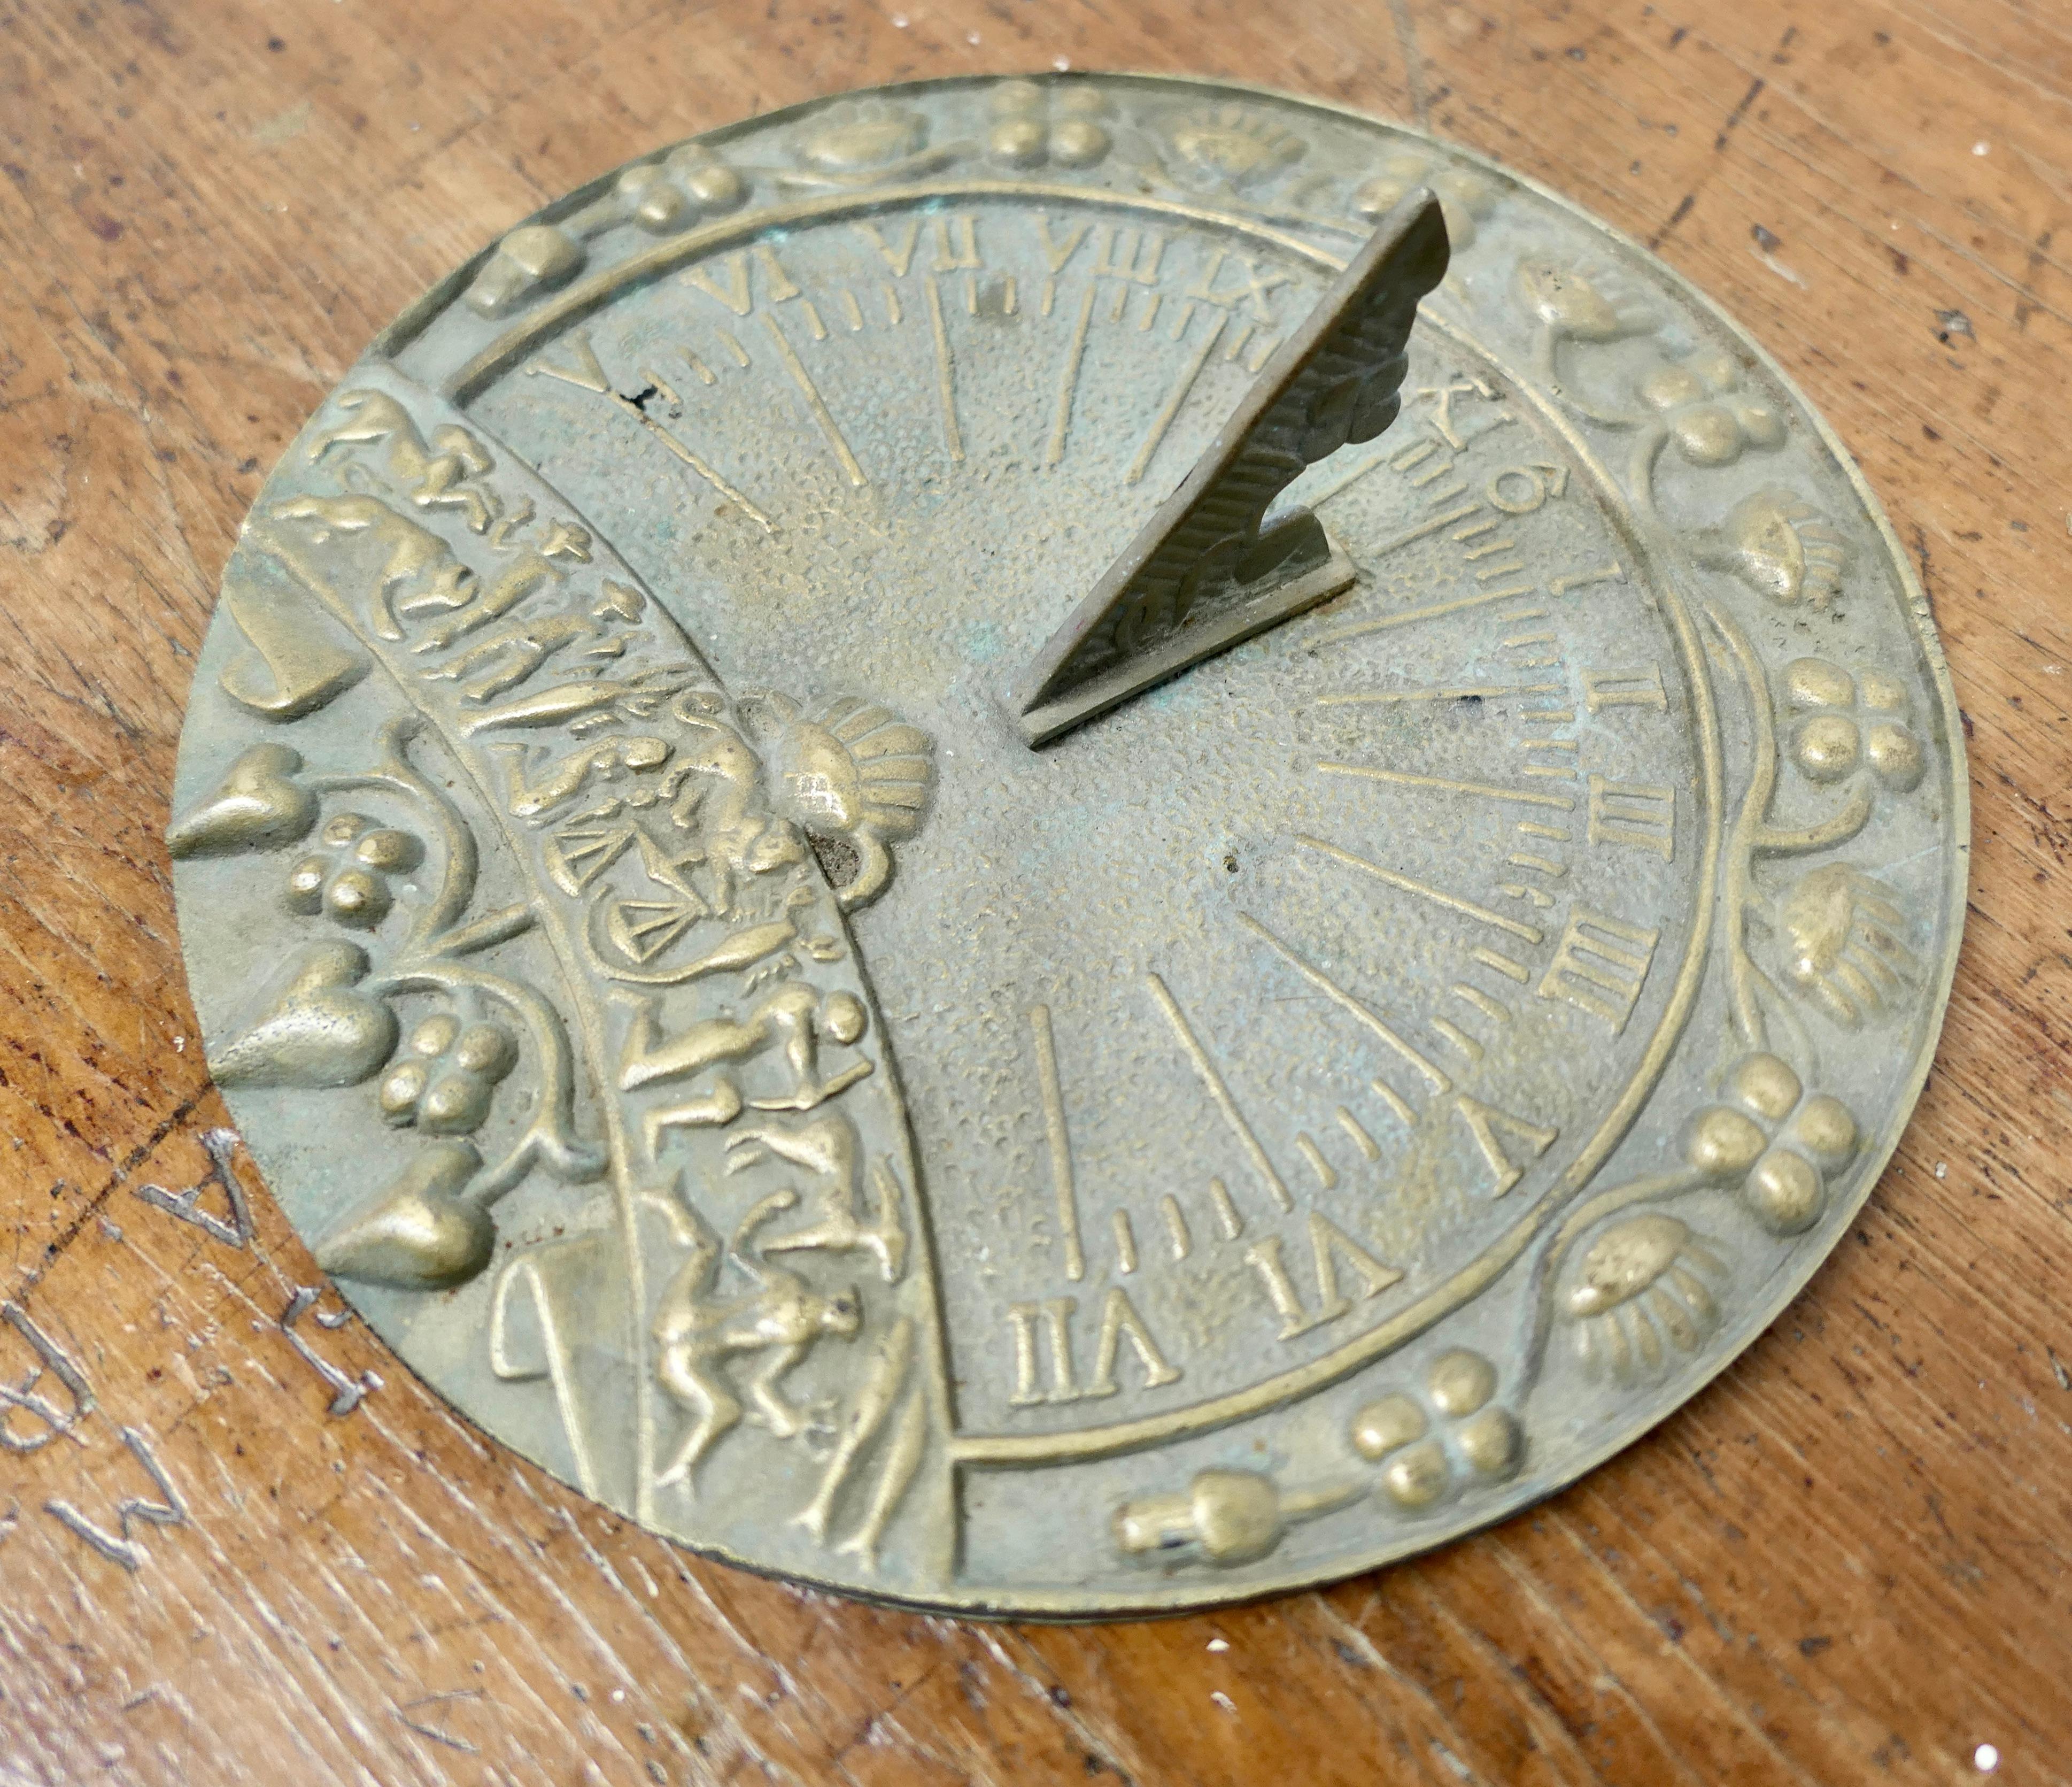 Weathered Brass Garden Sundial

This sundial is made in Cast Brass, it is a heavy piece, the numerals are Roman and there are also the astrological signs around the bottom
A very attractive piece with its own unique character
The Sundial is 3” tall